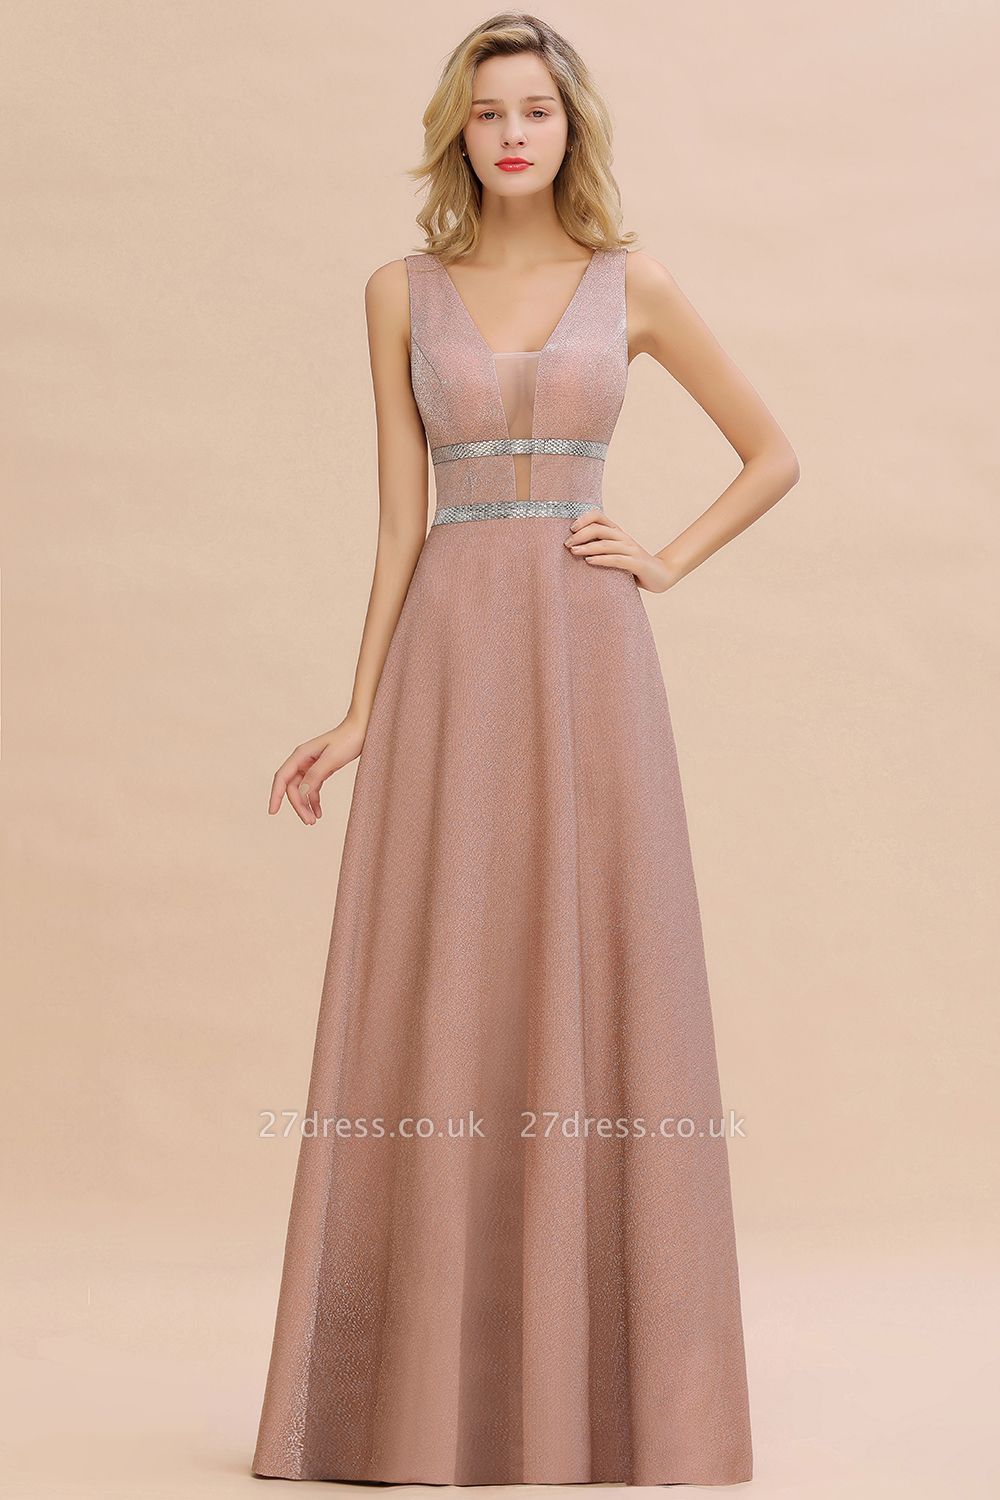 Sparkly Long Evening Dress with Shining Belt | Sexy Sleeveless Pink Formal Dress